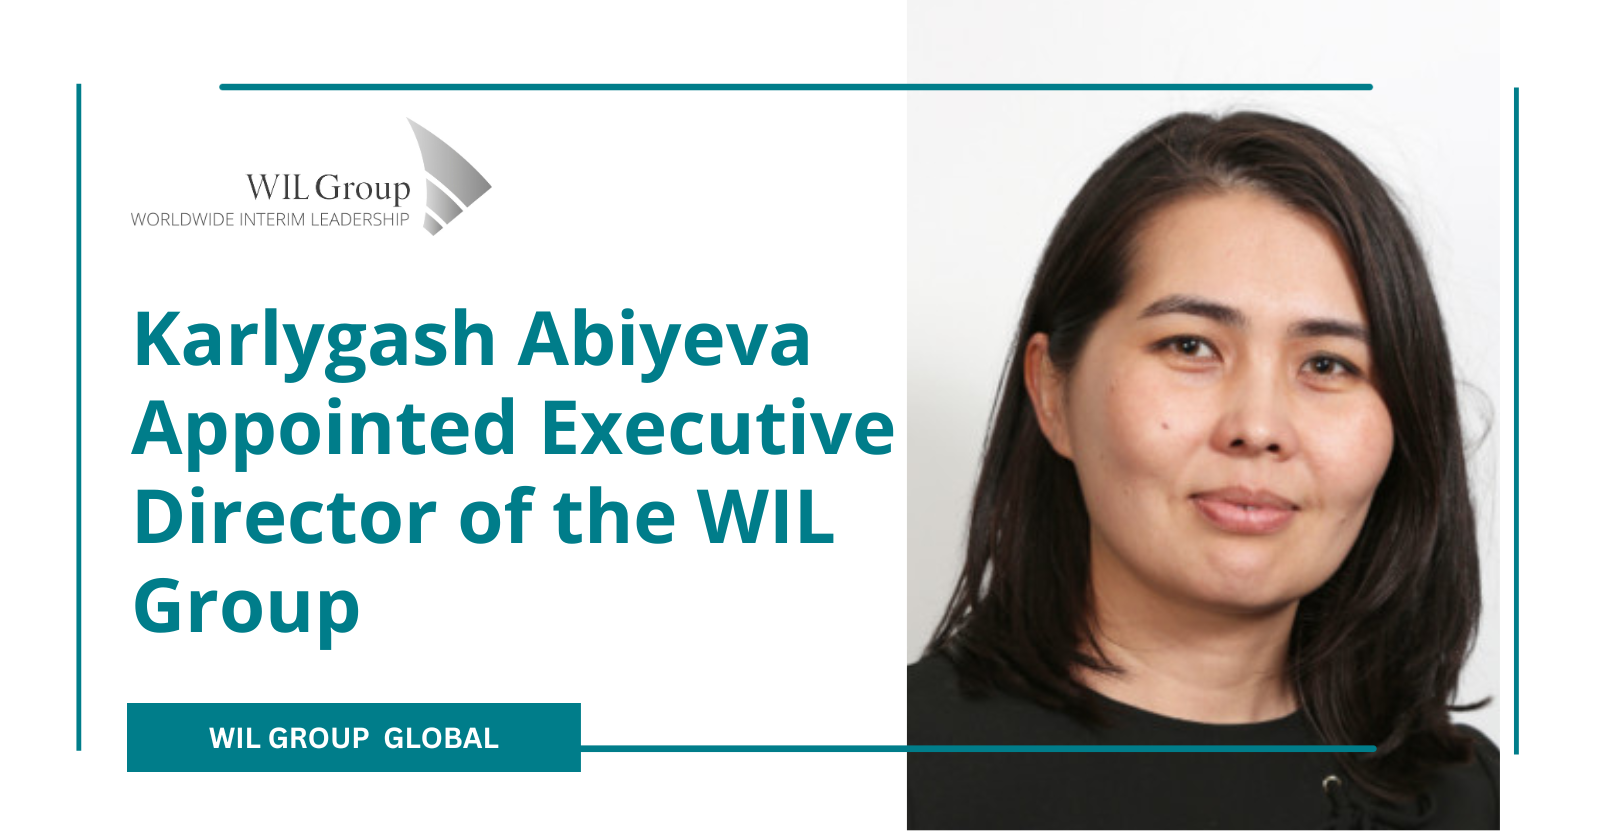 Thumbnail for Karlygash Abiyeva Appointed Executive Director of the WIL Group